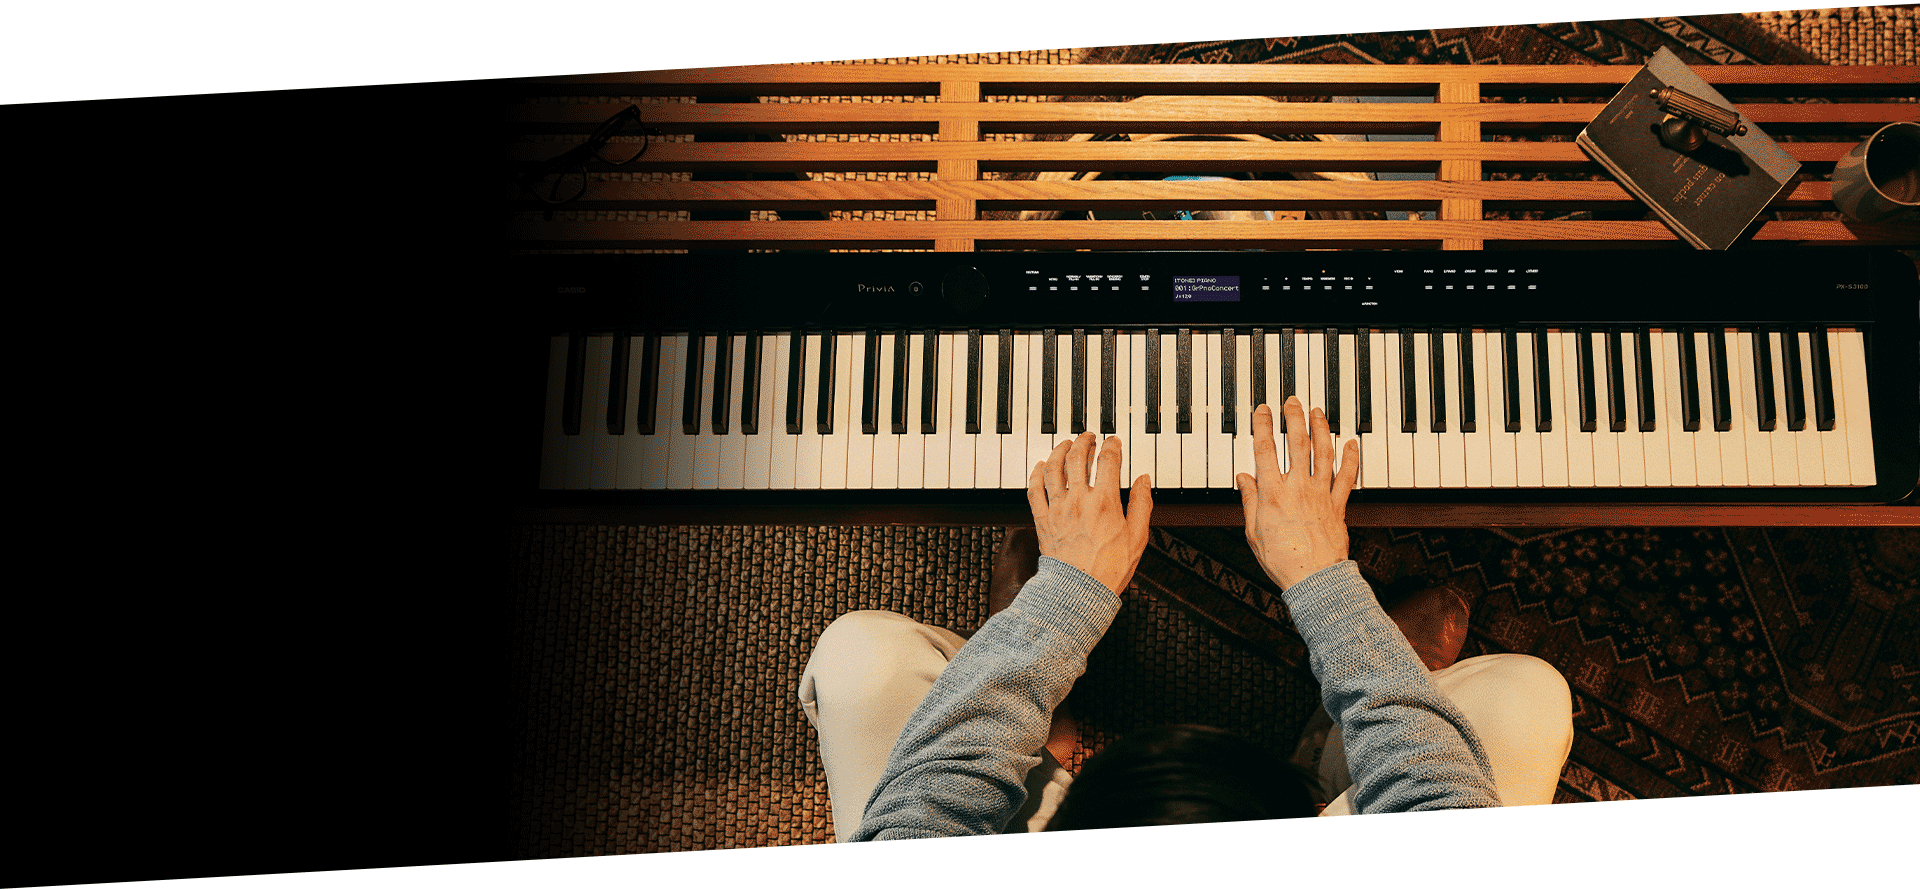 PX-S3100 Pure piano is just the beginning.